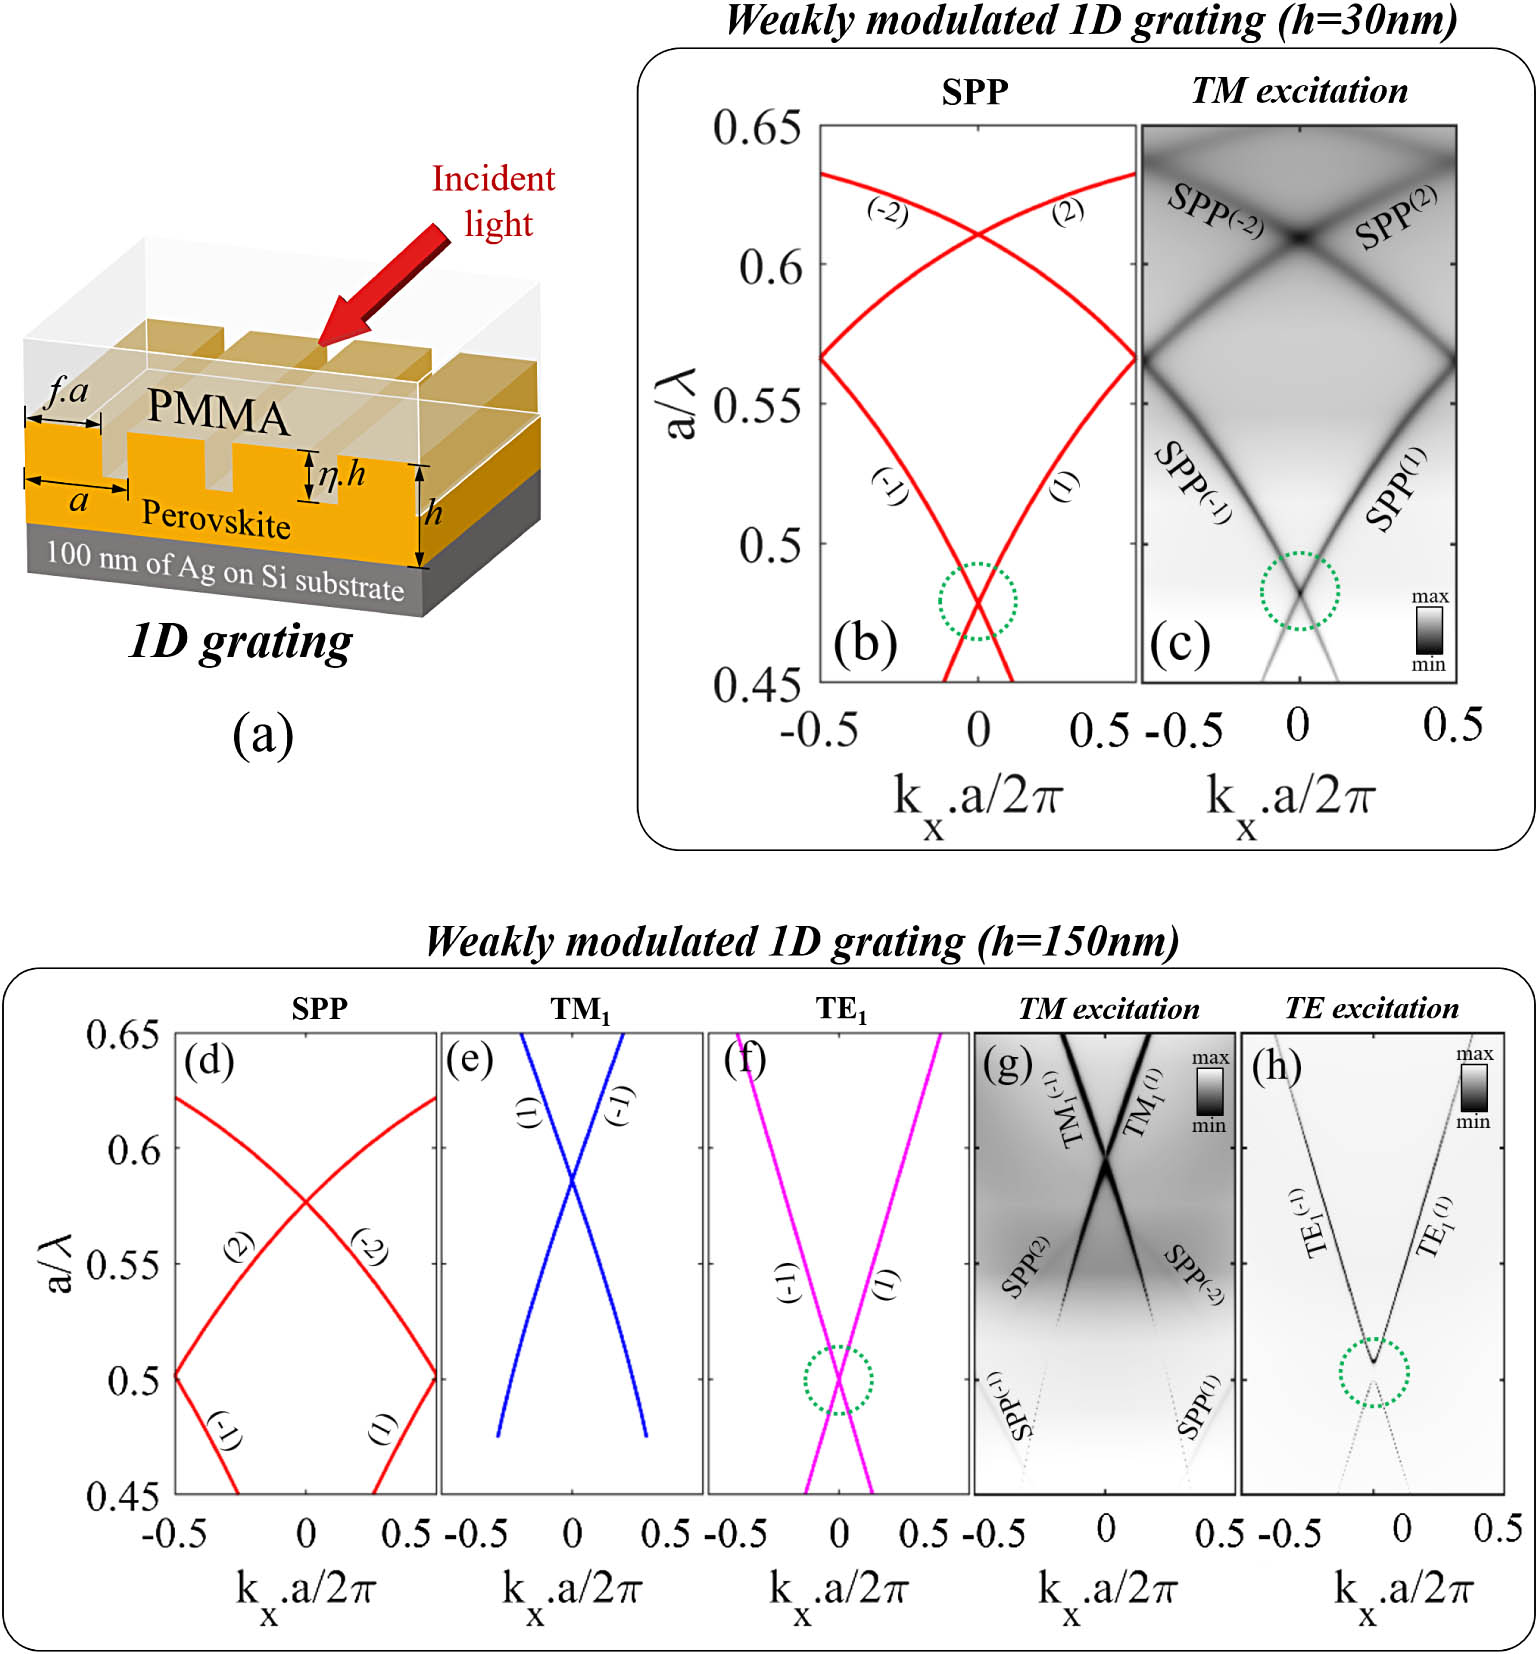 (a) Design of the perovskite metasurface. (b), (d), (e), (f) Folded dispersion of different guided modes extracted from Figs. 1(b), 1(e), 1(f) with period a=300 nm. (c), (g), (h) Angle-resolved reflectivity spectra obtained from RCWA calculations for (c) h=30 nm and (g), (h) h=150 nm. All of these calculations are carried out with a=300 nm, η=0.3, and f=0.9.